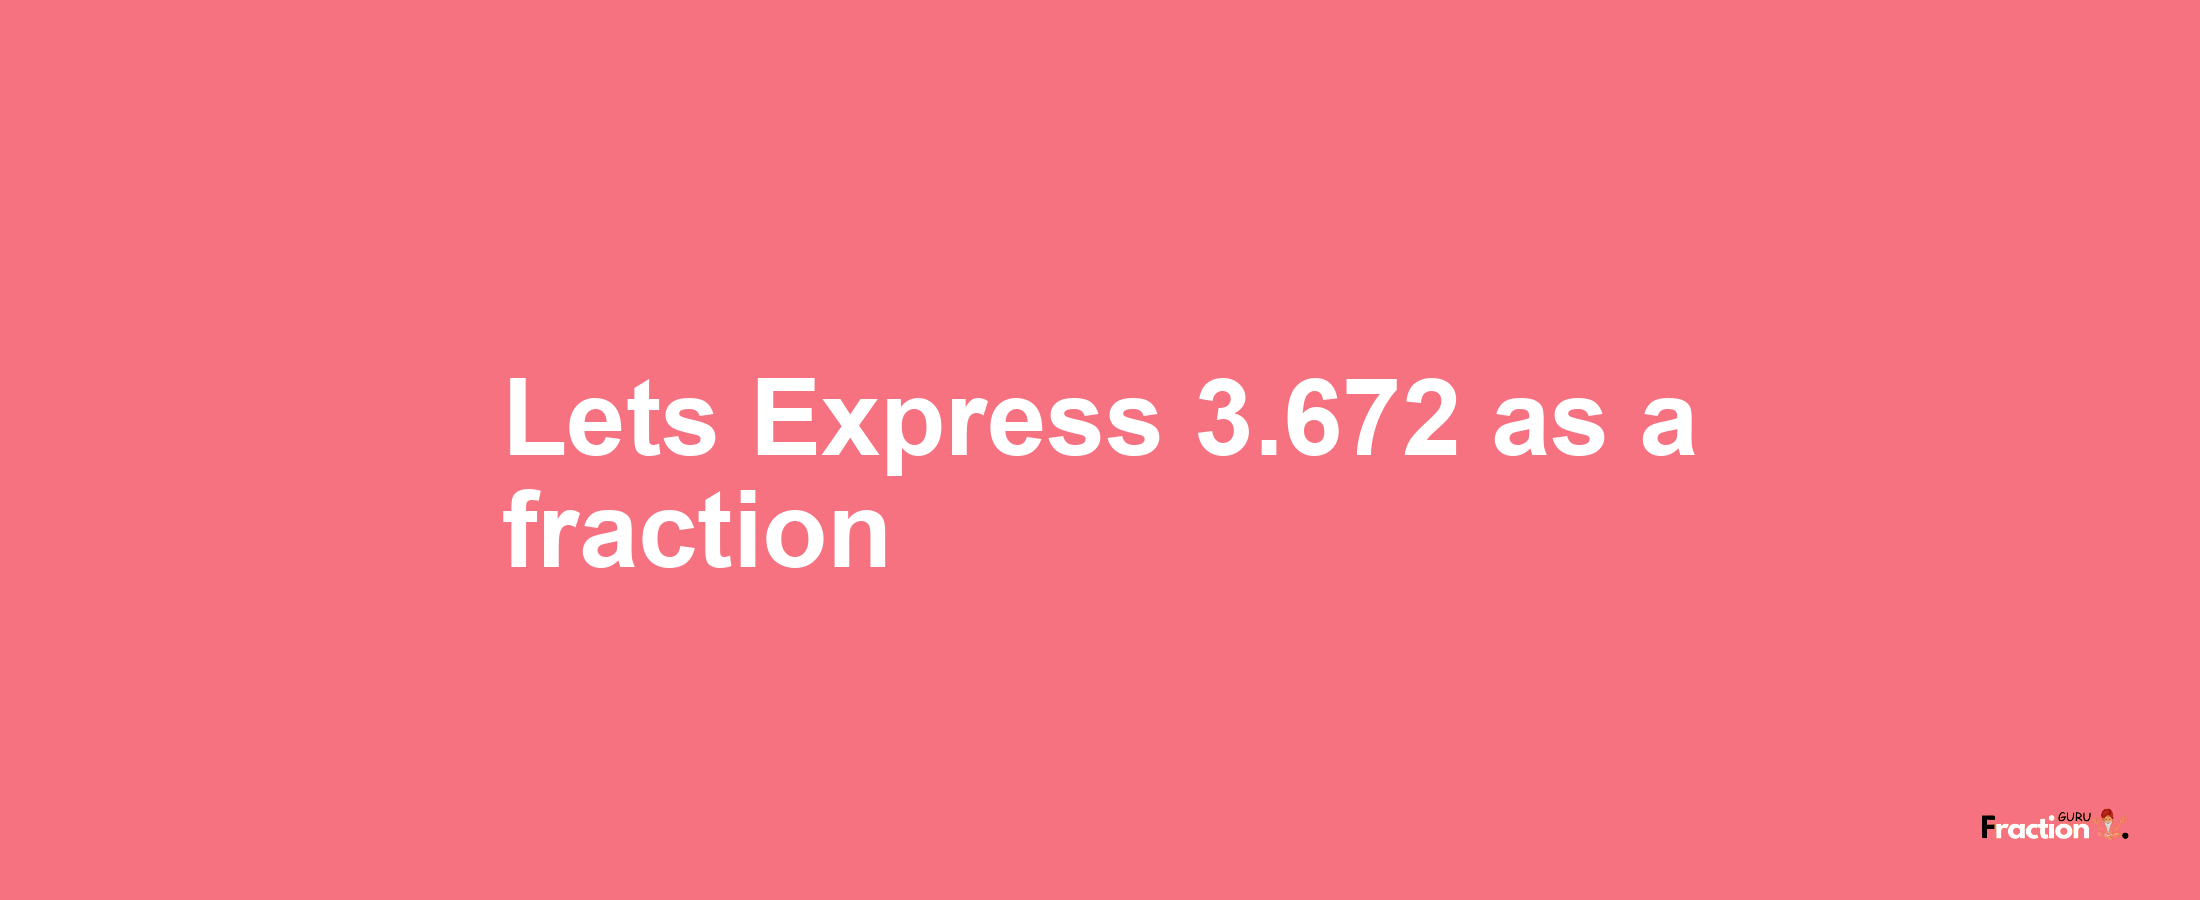 Lets Express 3.672 as afraction